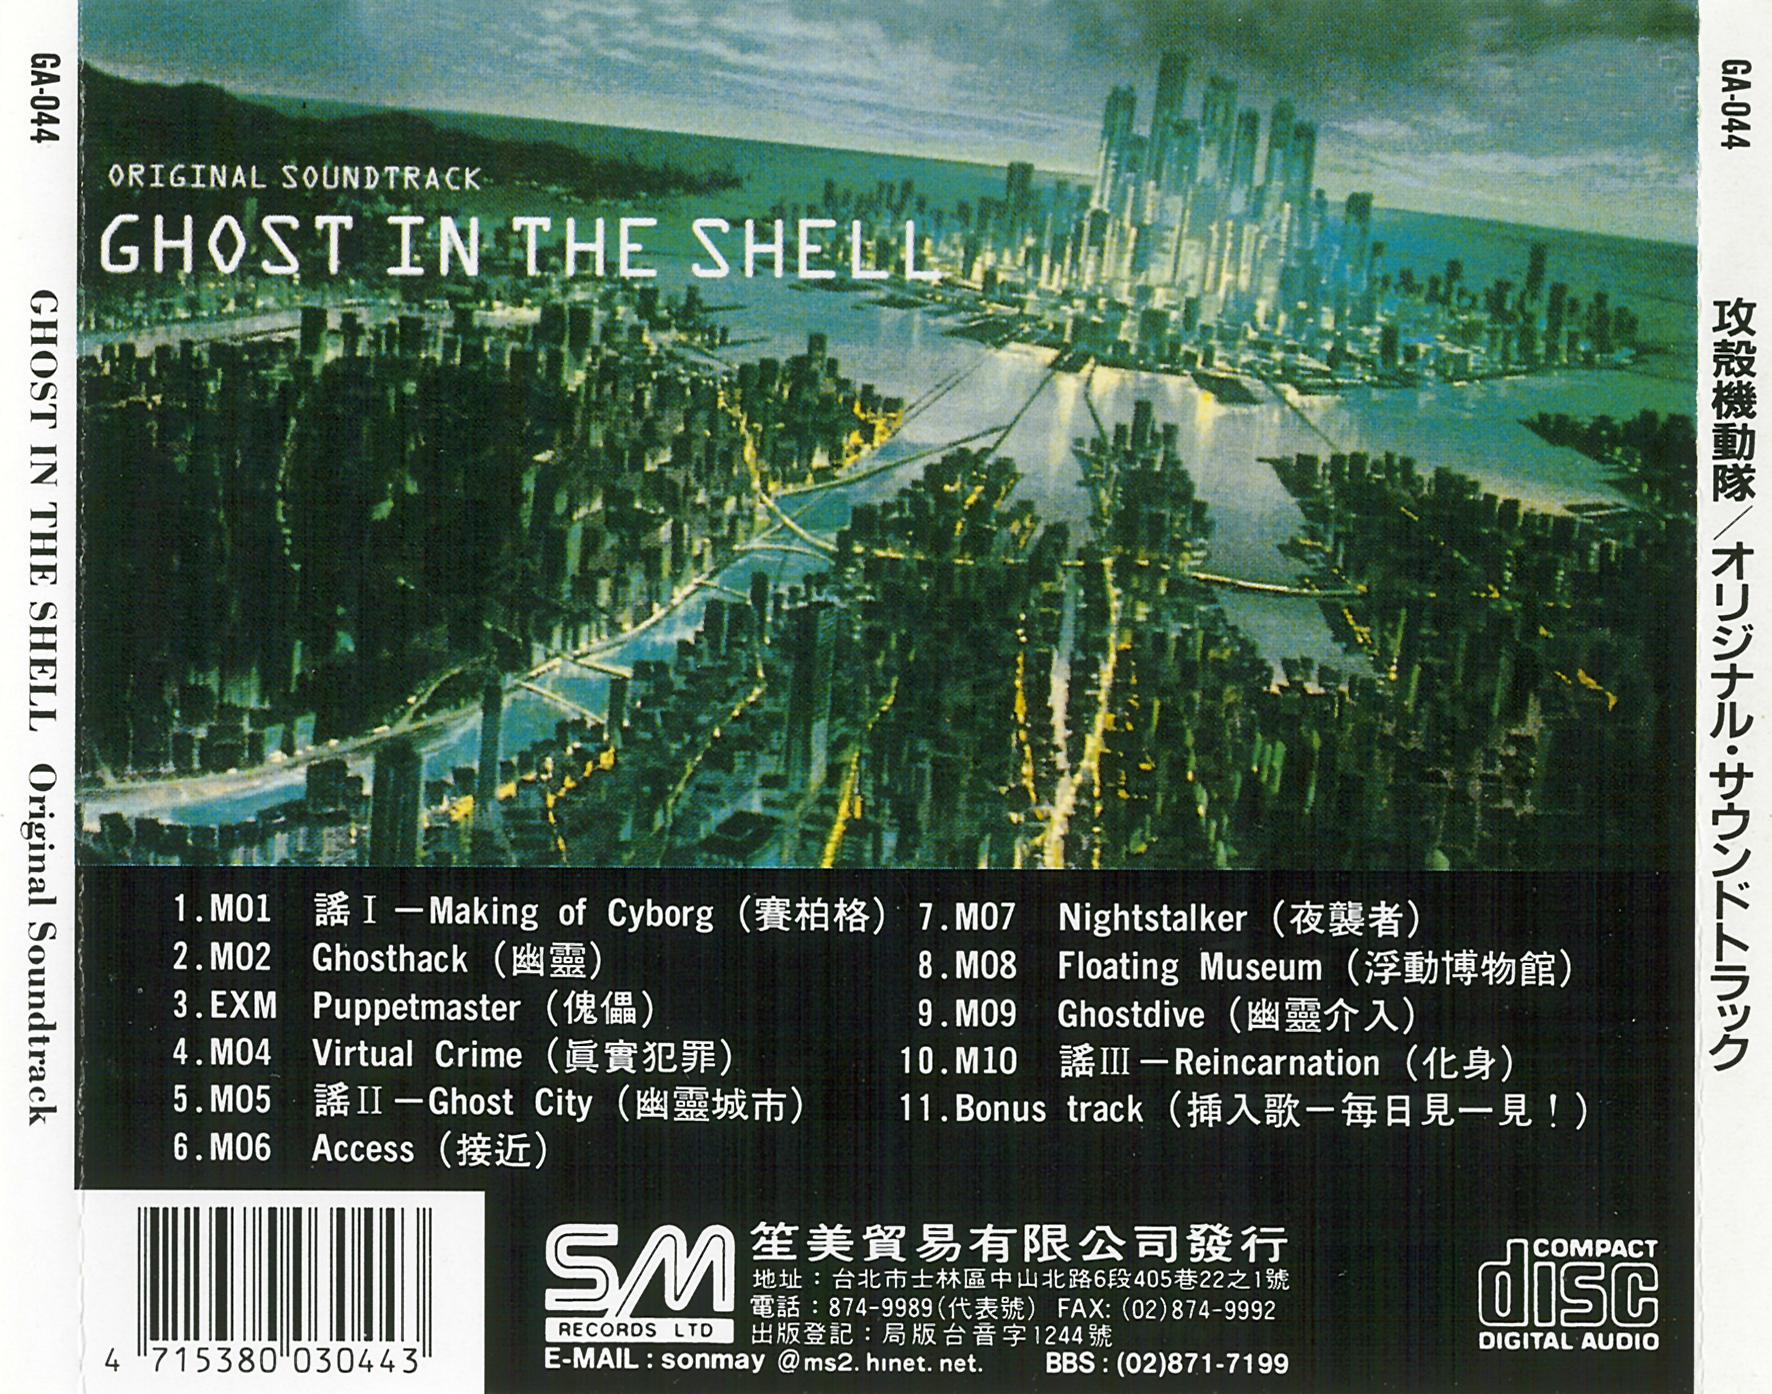 Ghost In The Shell Music Stuff (Some) : Free Download, Borrow, and